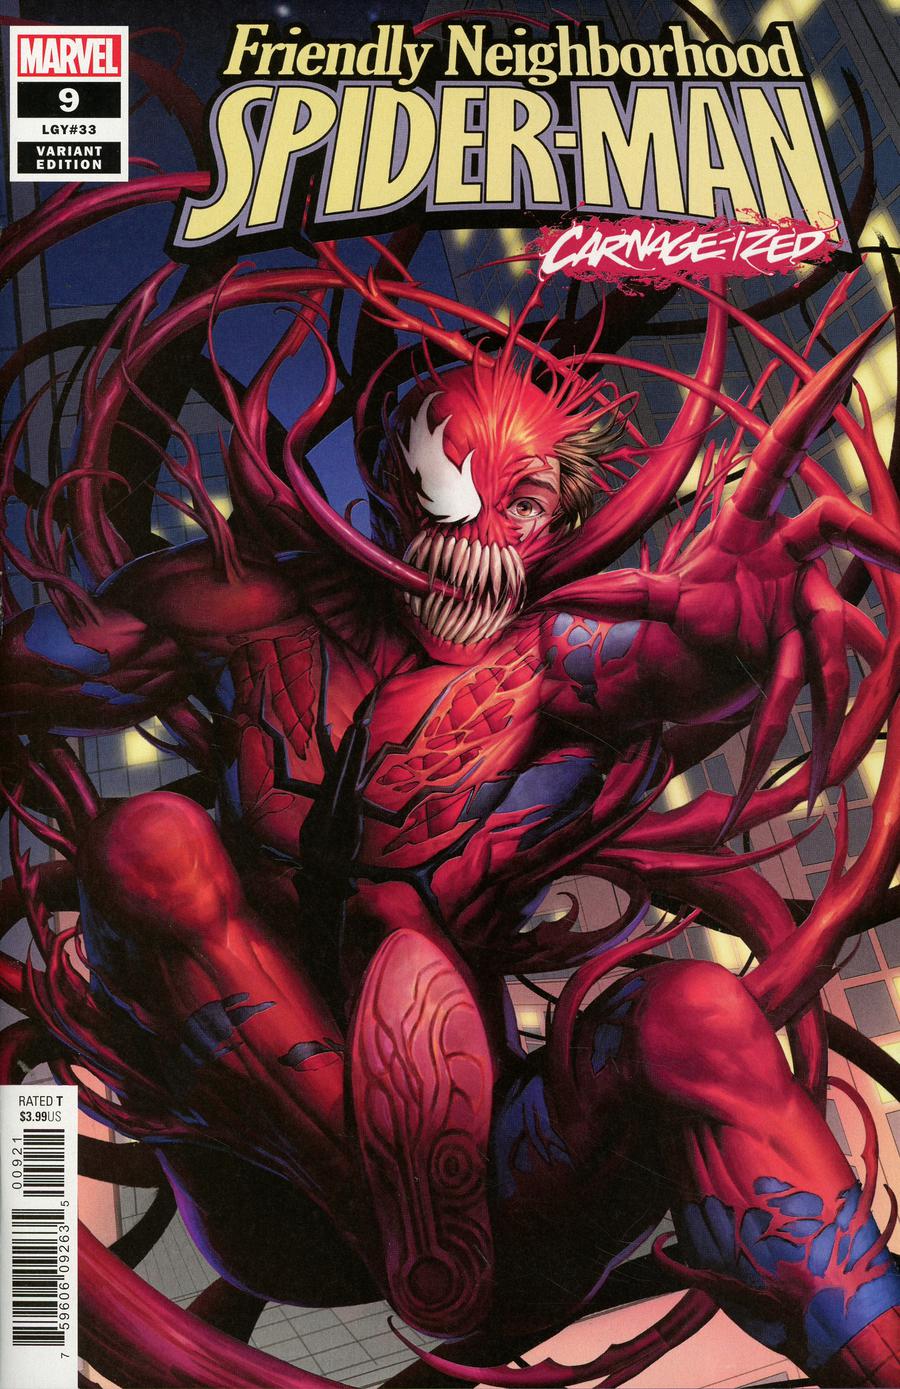 Friendly Neighborhood Spider-Man Vol 2 #9 Cover B Variant Woo Dae Shim Carnage-Ized Cover